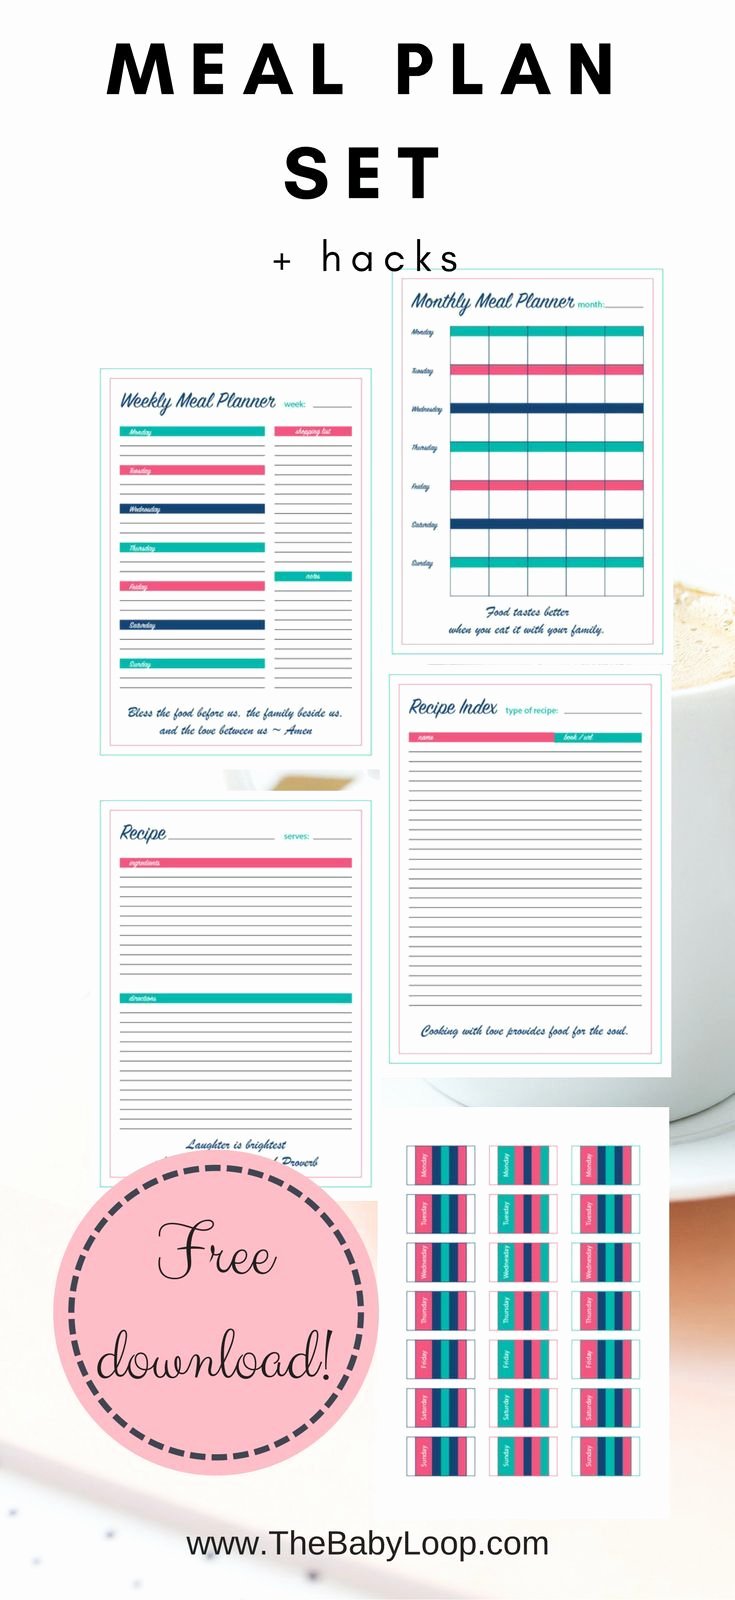 Family Meal Plan Template Inspirational 25 Unique Meal Plan Templates Ideas On Pinterest